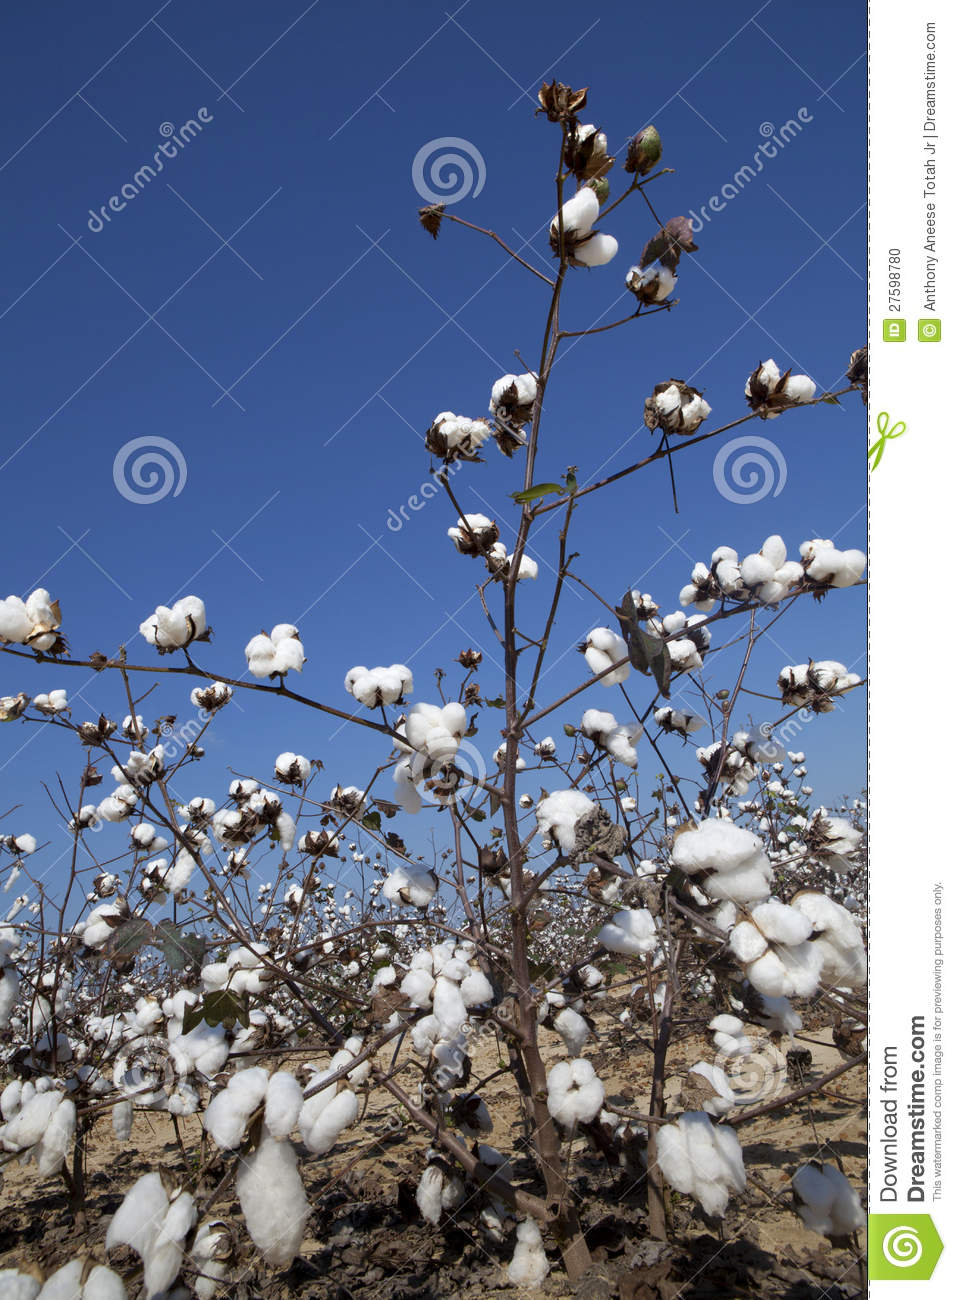 Field Of Cotton Plants Ready For Harvest Photographed At Ground Level